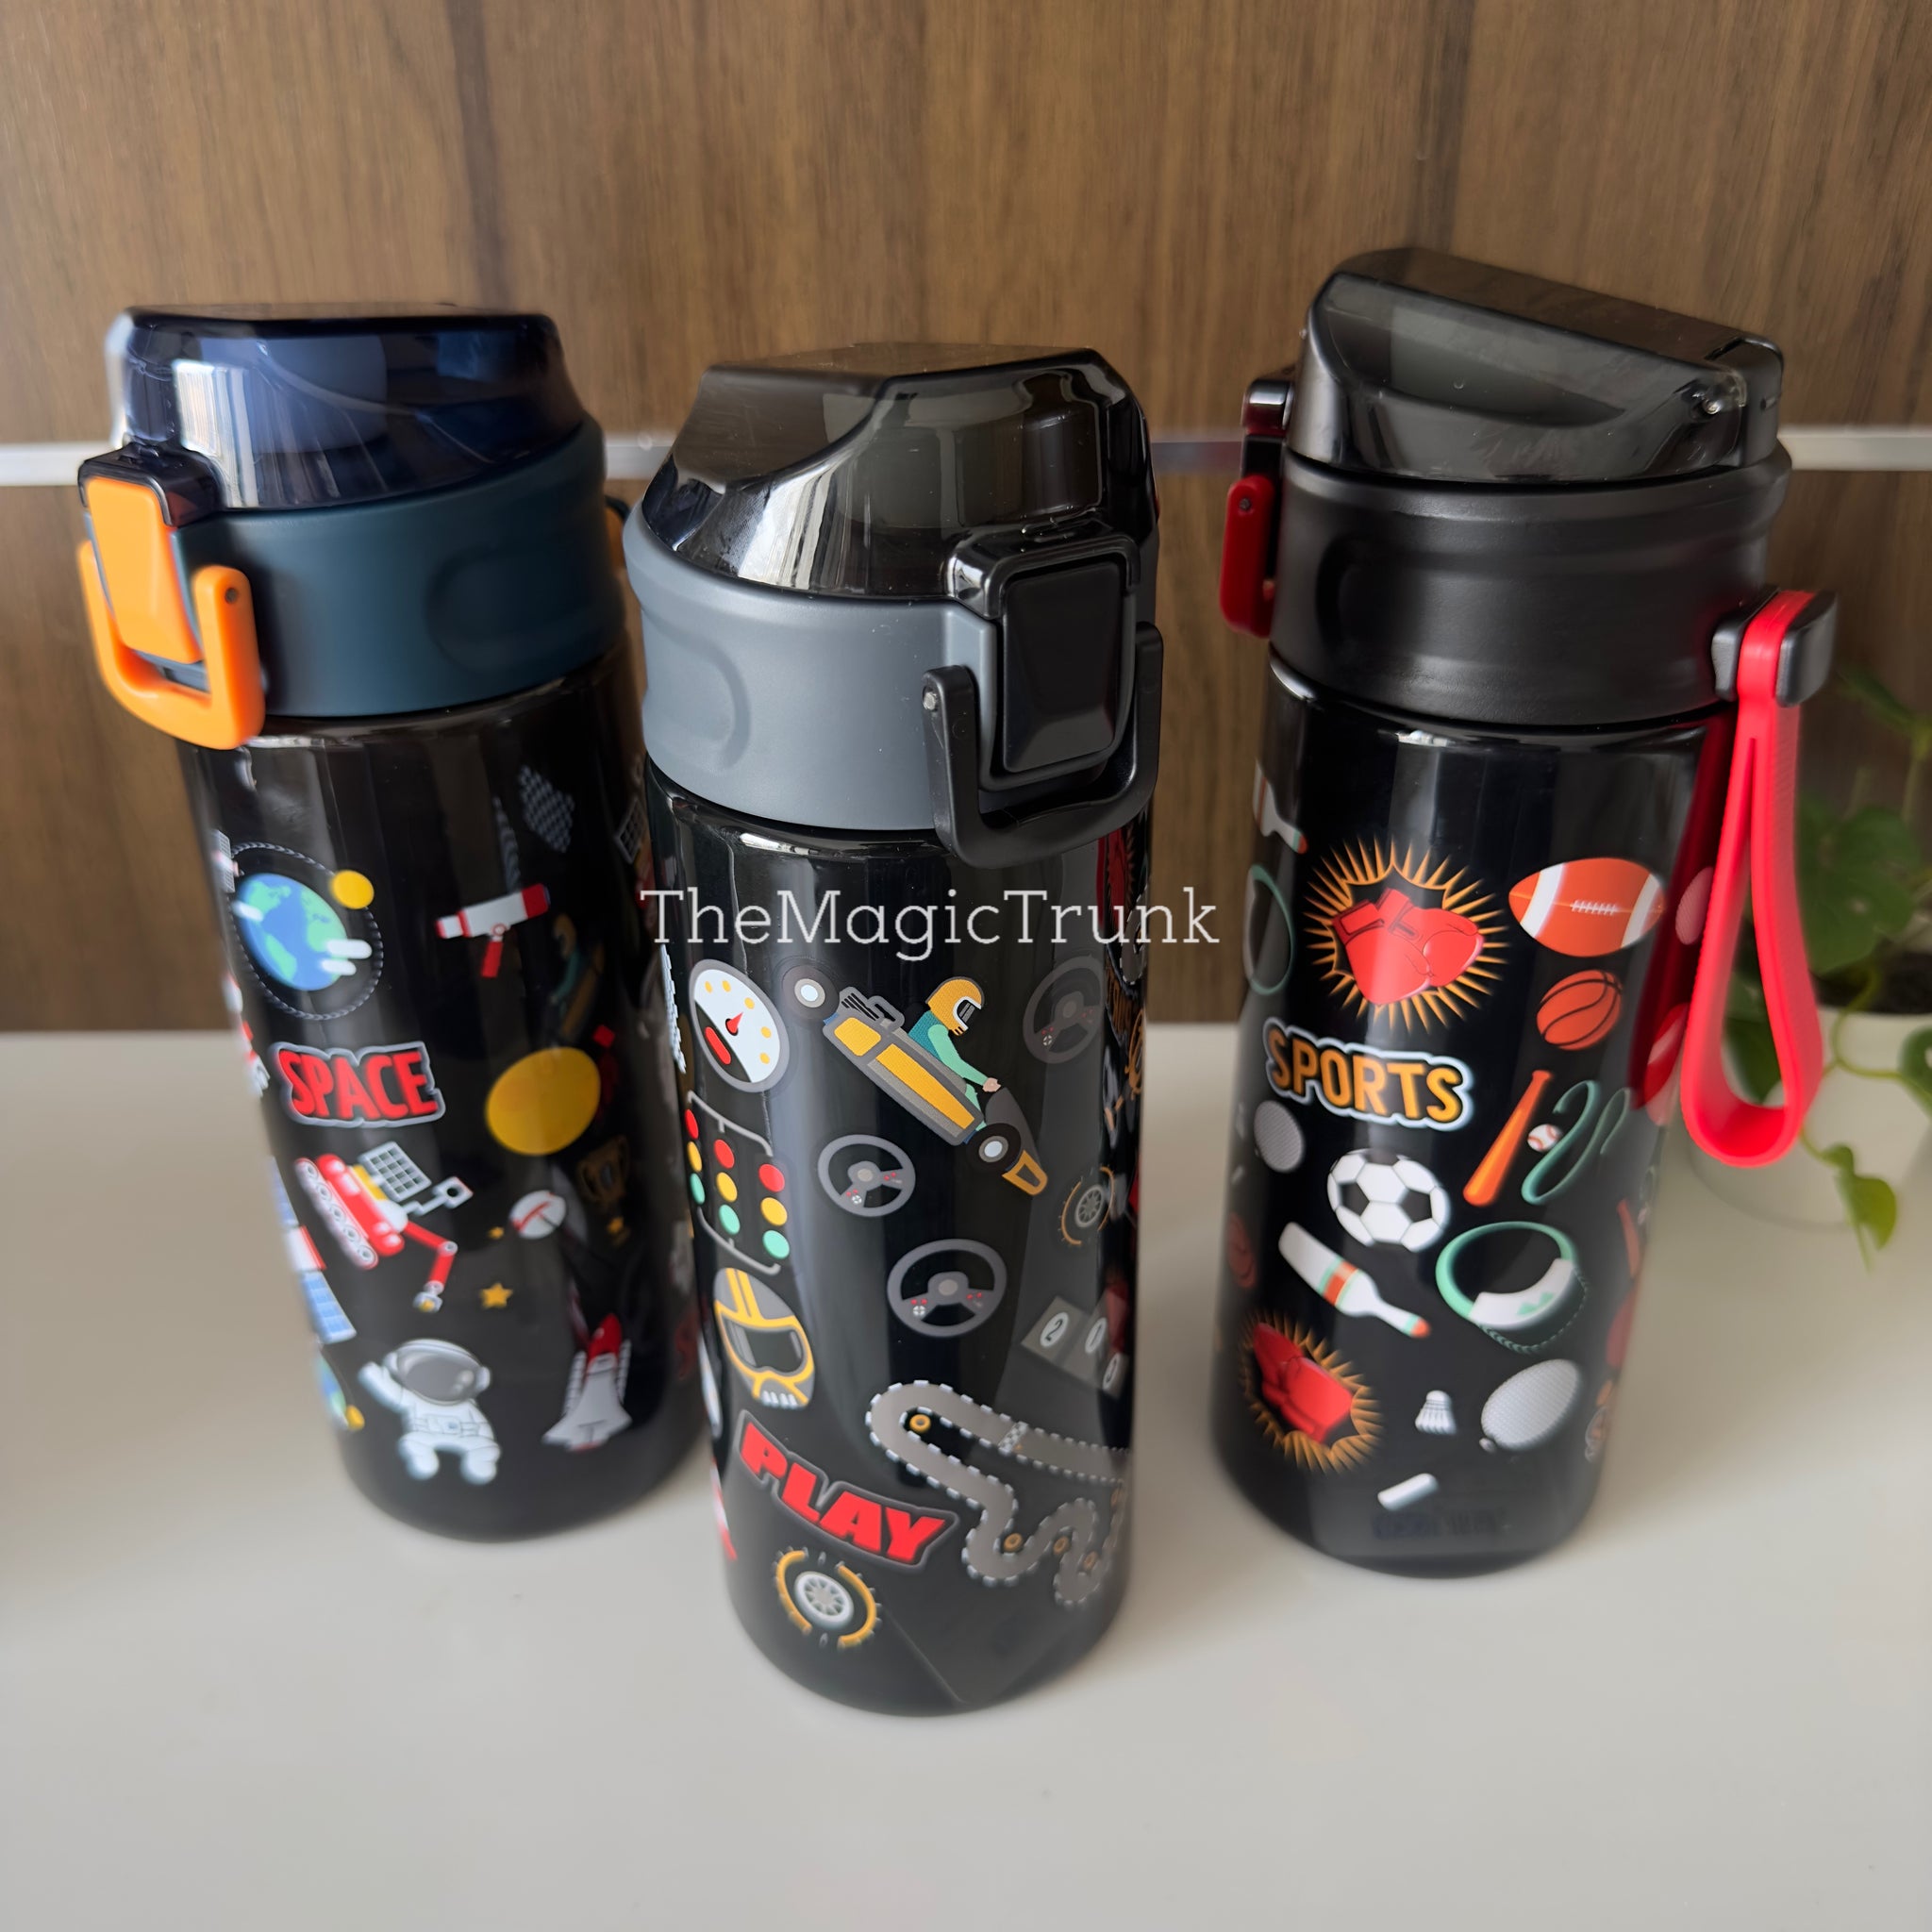 1pc Water Bottle Pouch for Accessories, Running Water Bottle